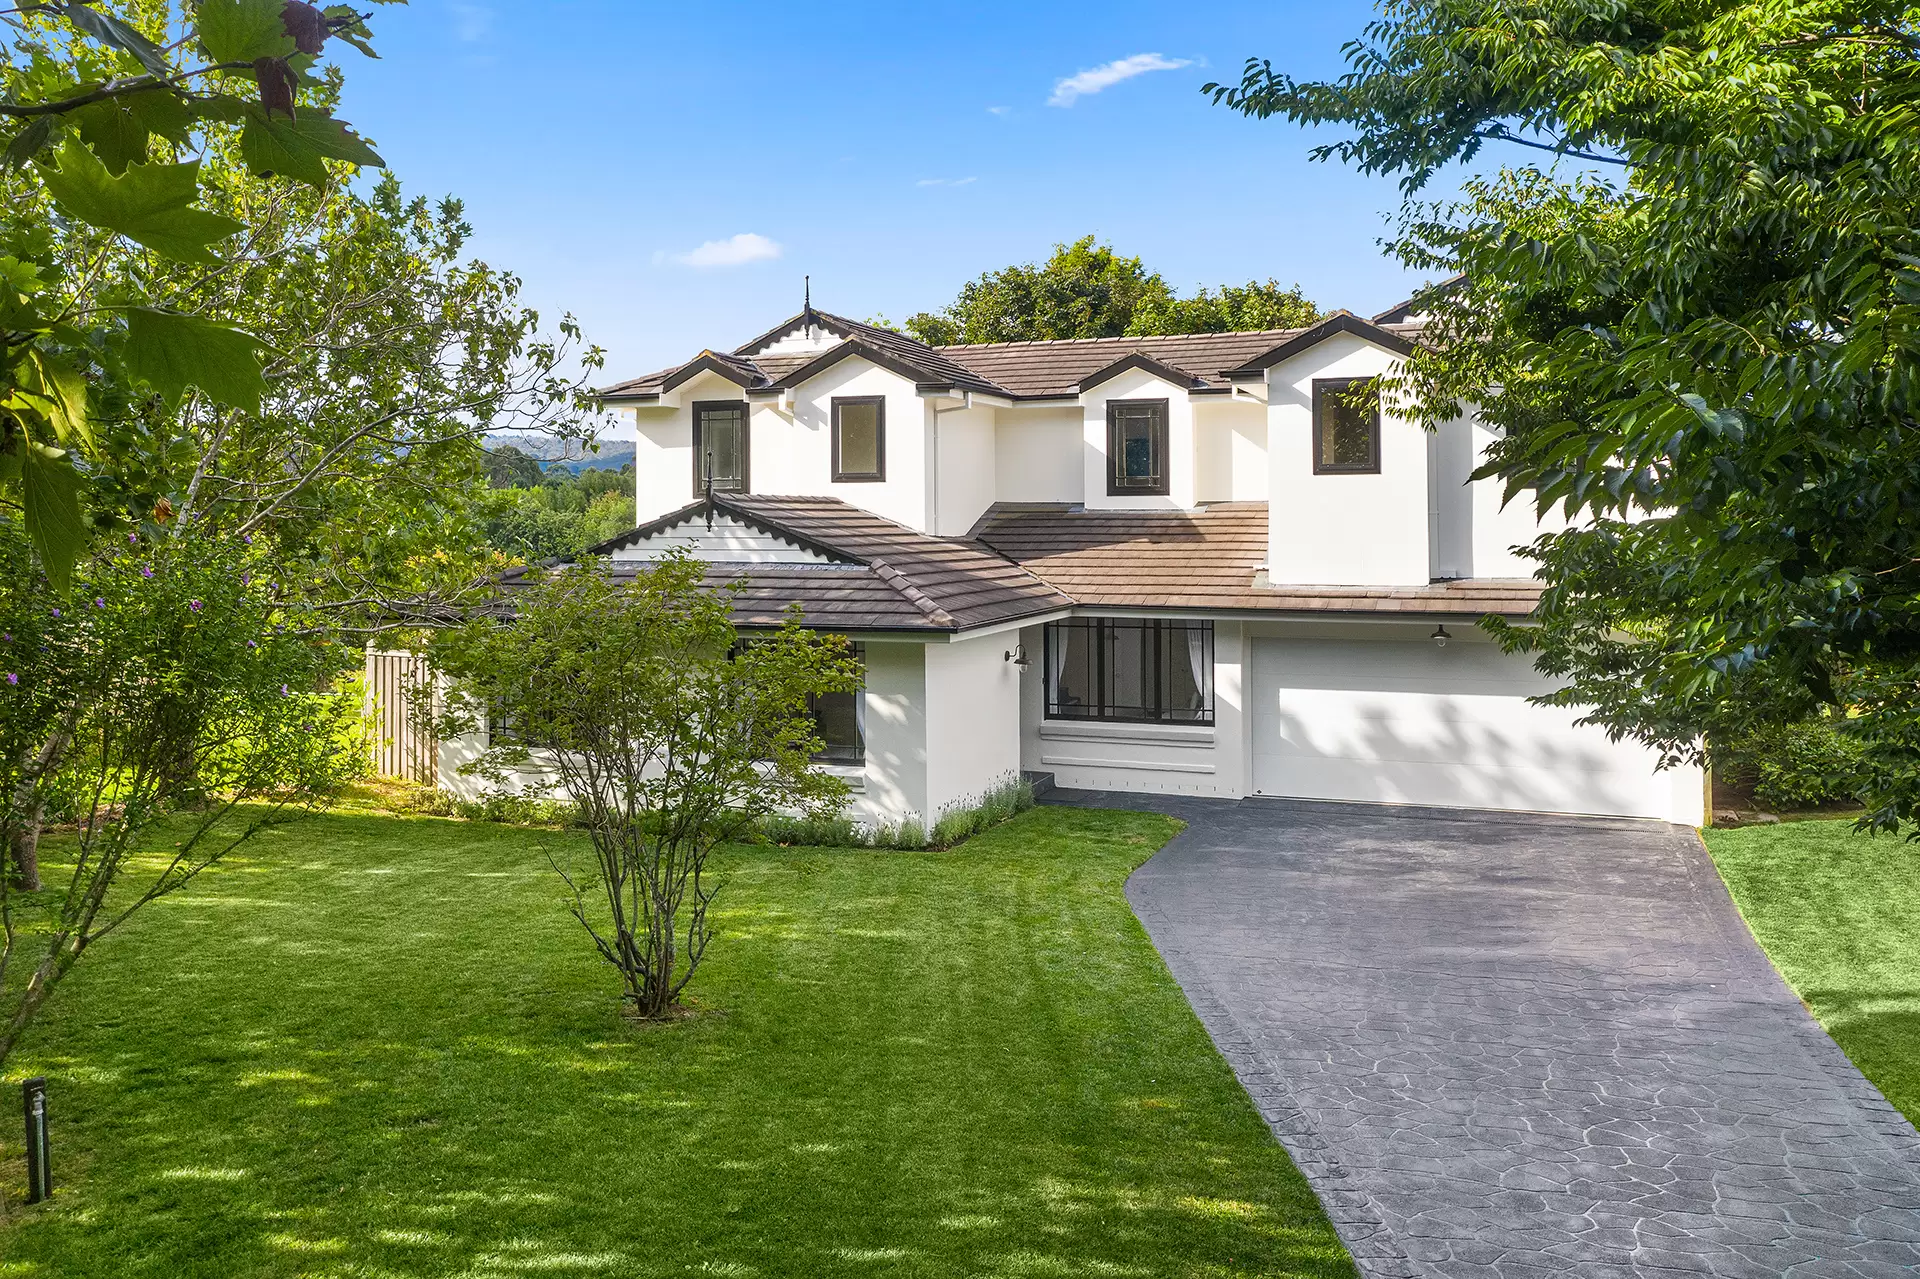 Photo #1: 11 Plane Tree Close, Bowral - Sold by Drew Lindsay Sotheby's International Realty